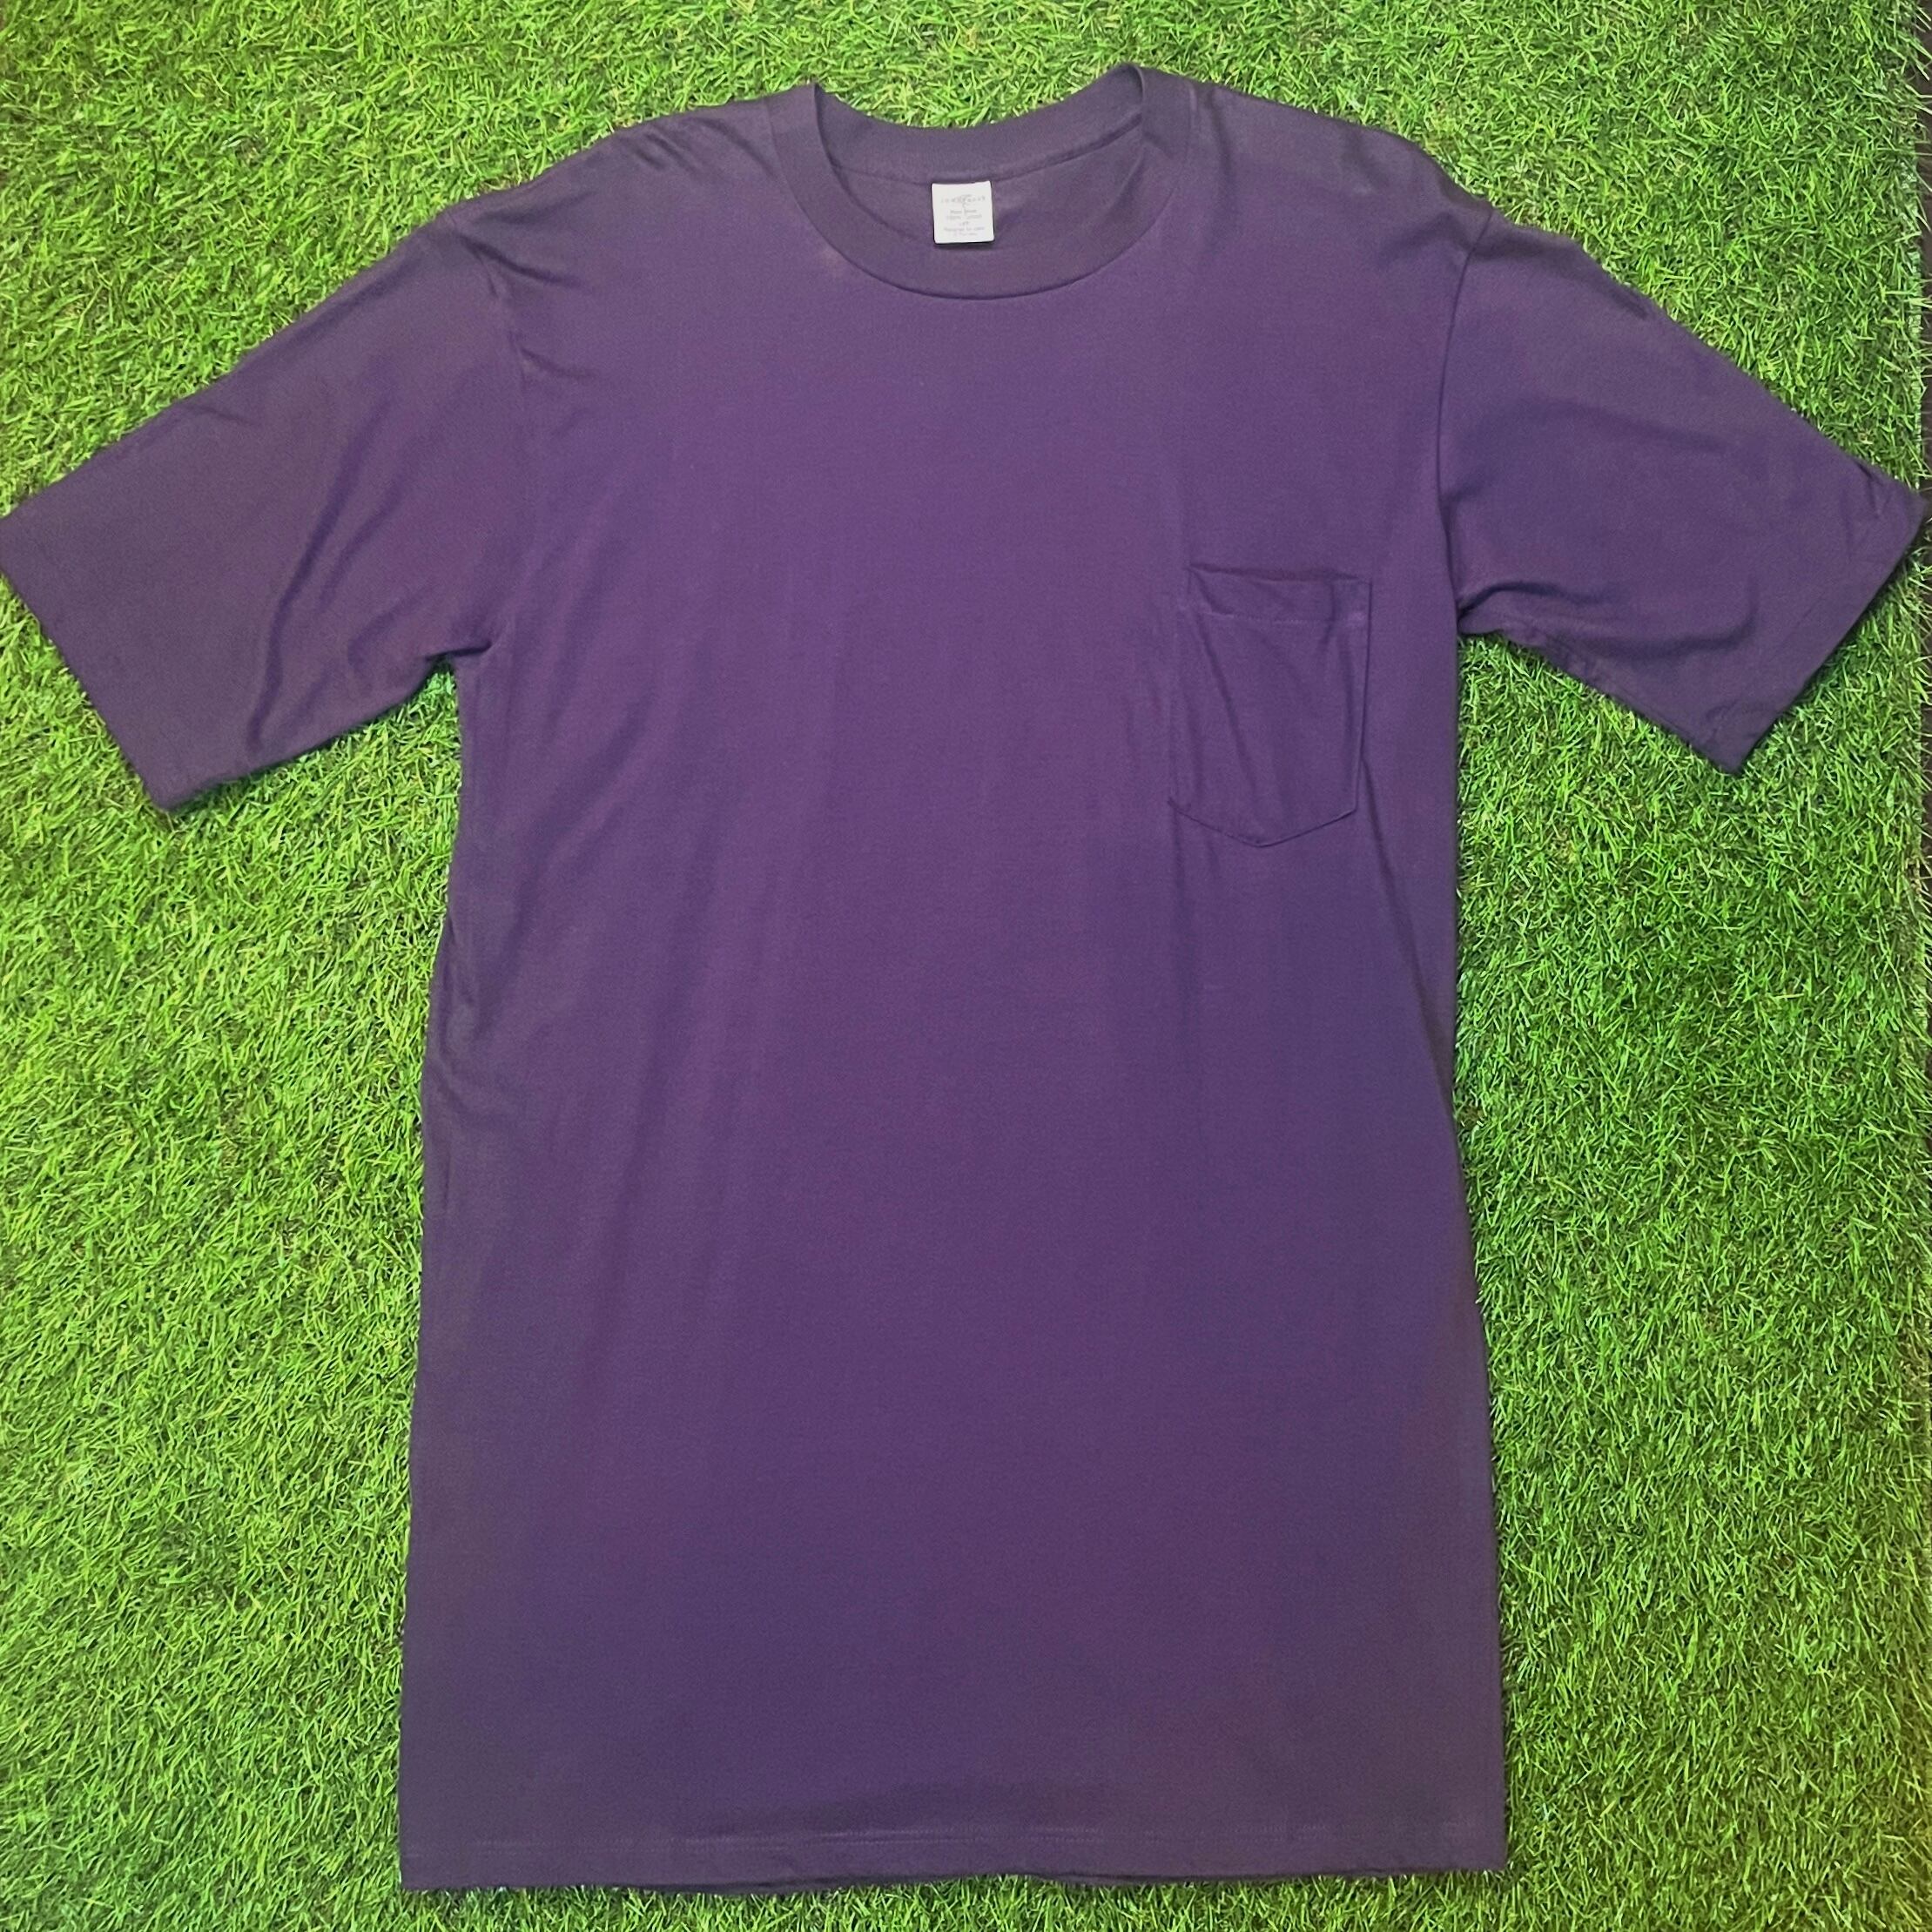 90s TOWN CRAFT Purple Long T-shirt / Made In USA 古着 紫 ムラサキ ワンピース Tシャツ ロングT  JC Penney 無地 単色